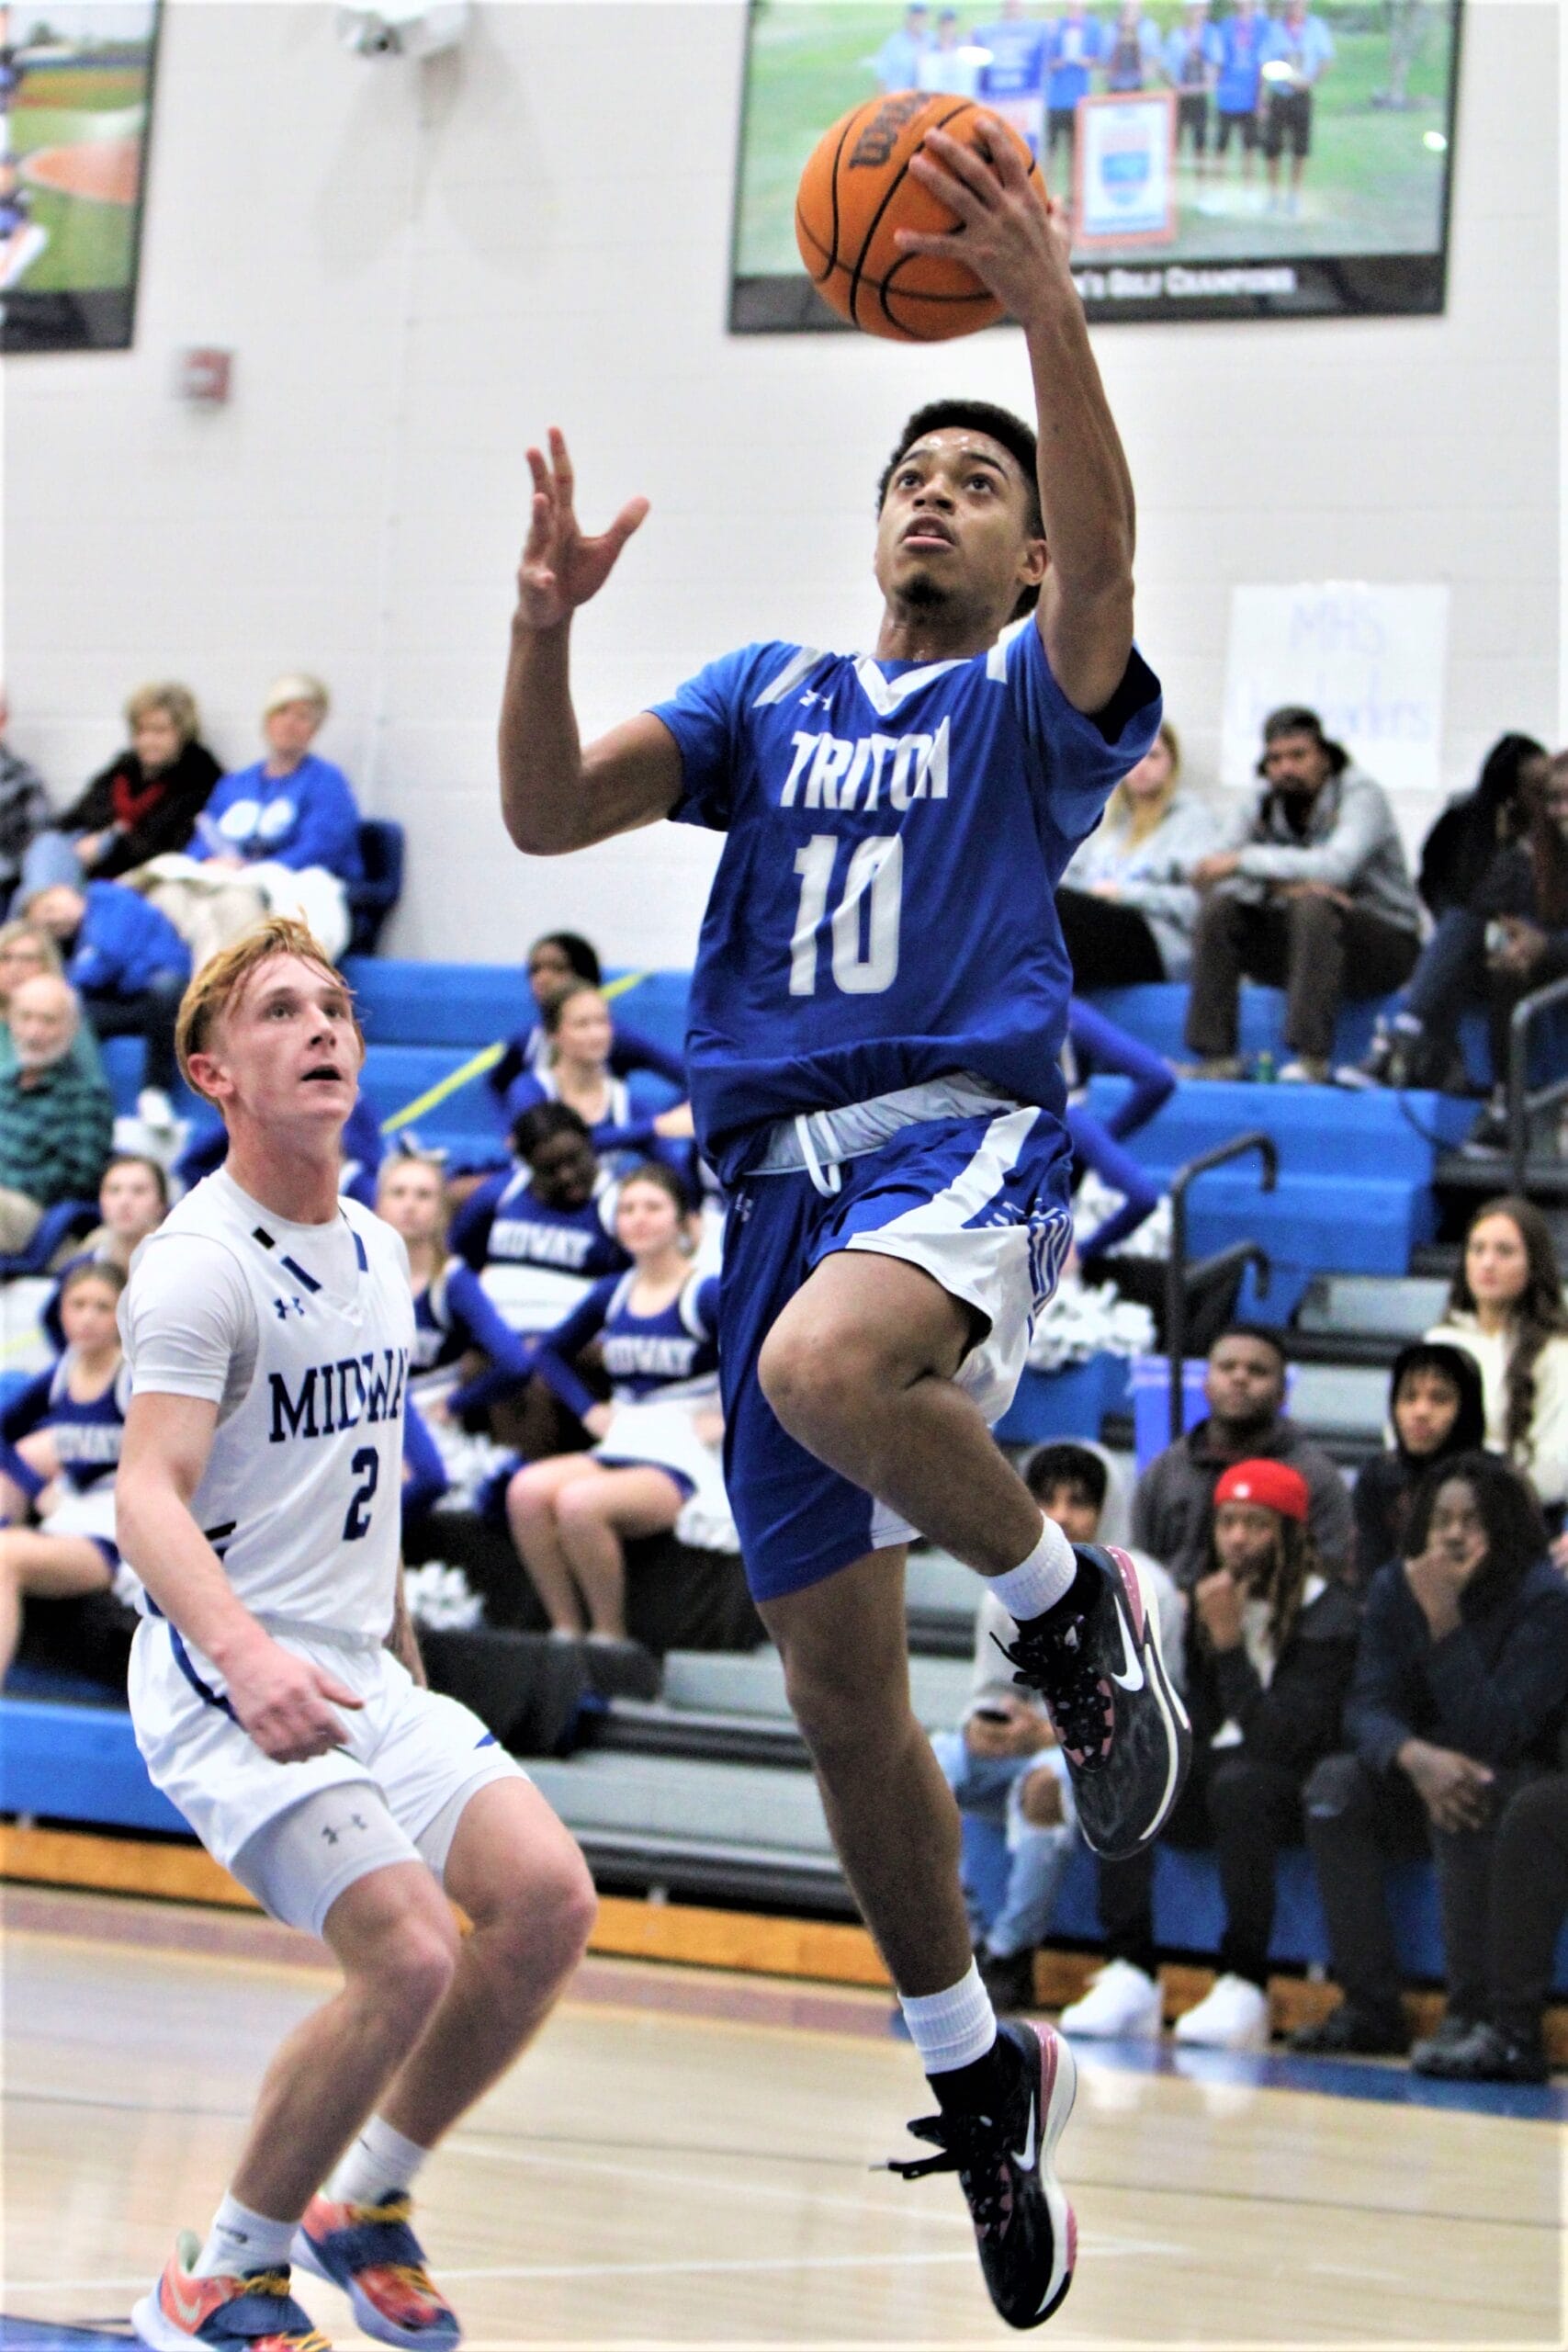 Triton boys come back for varsity sweep at Midway